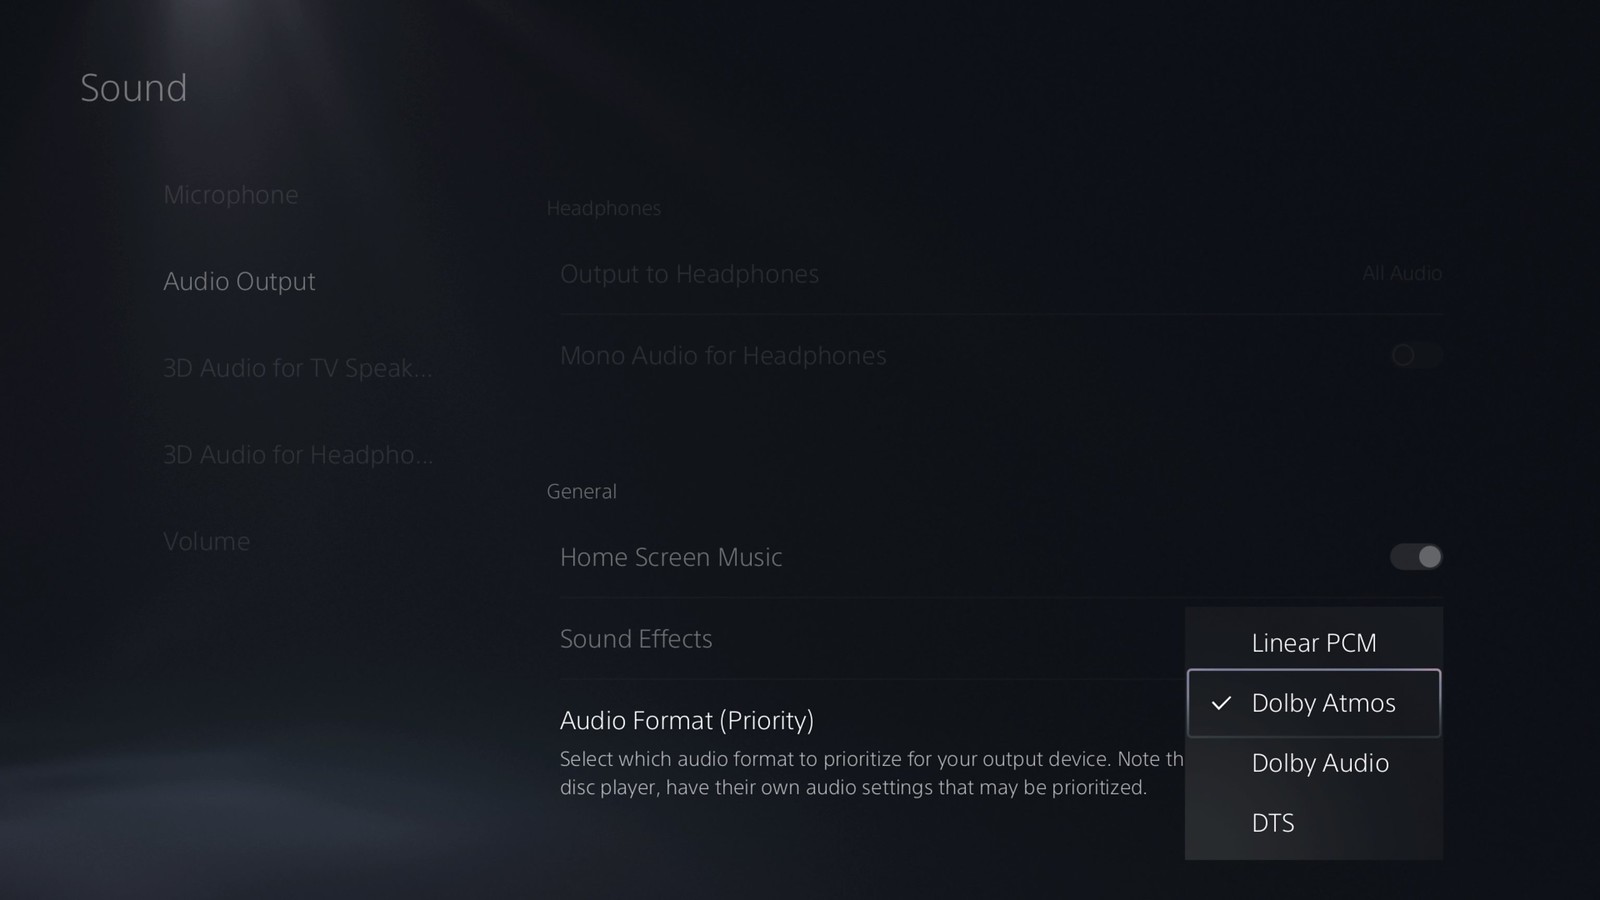 PS5 update: Dolby Atmos is finally supported - Son-Vidéo.com: blog